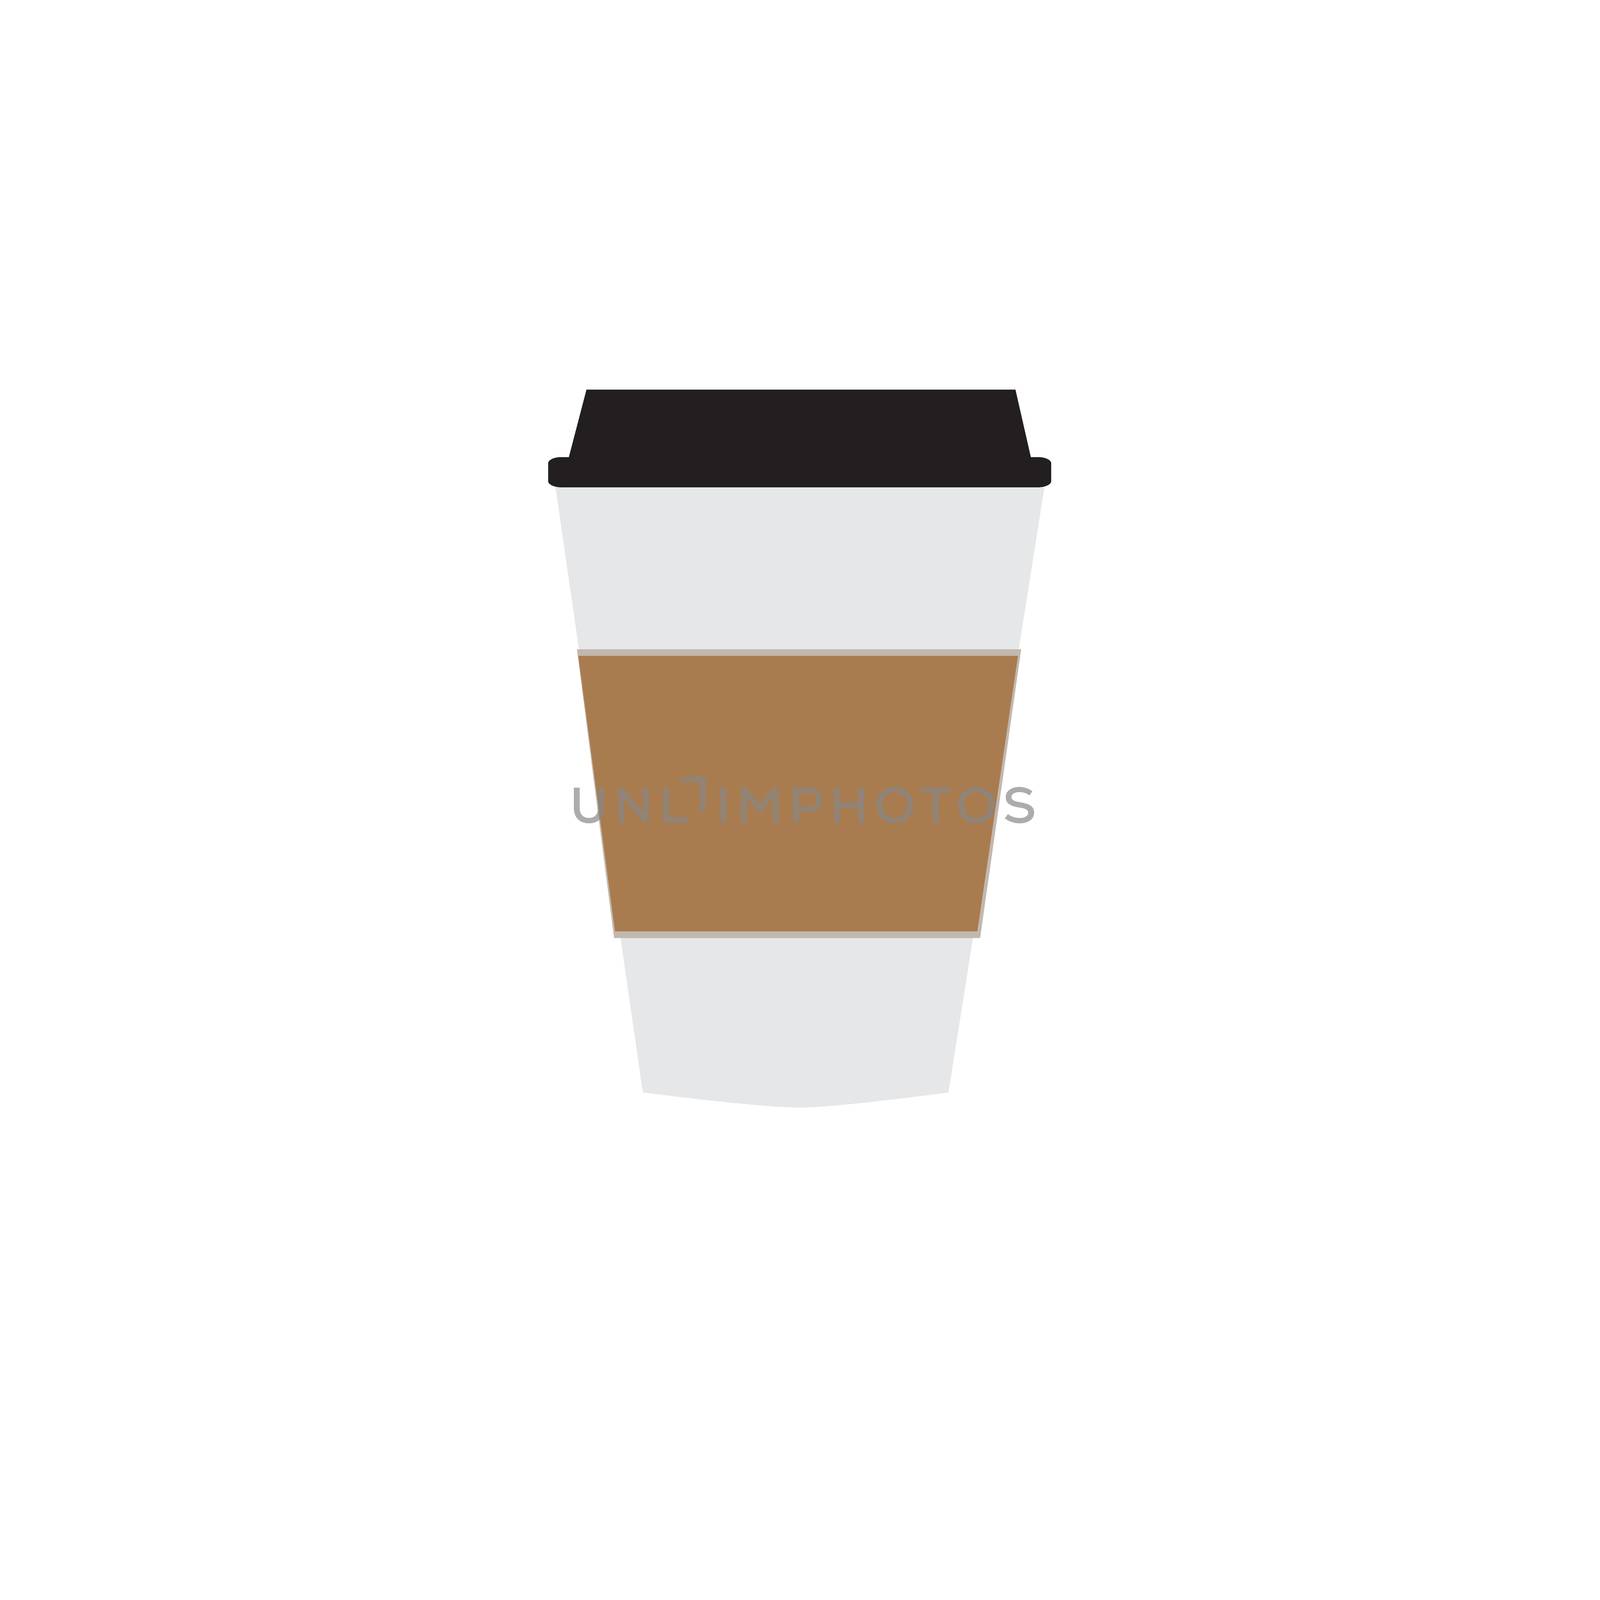 Disposable coffee cup icon on white background. flat style. coffee cup sign..